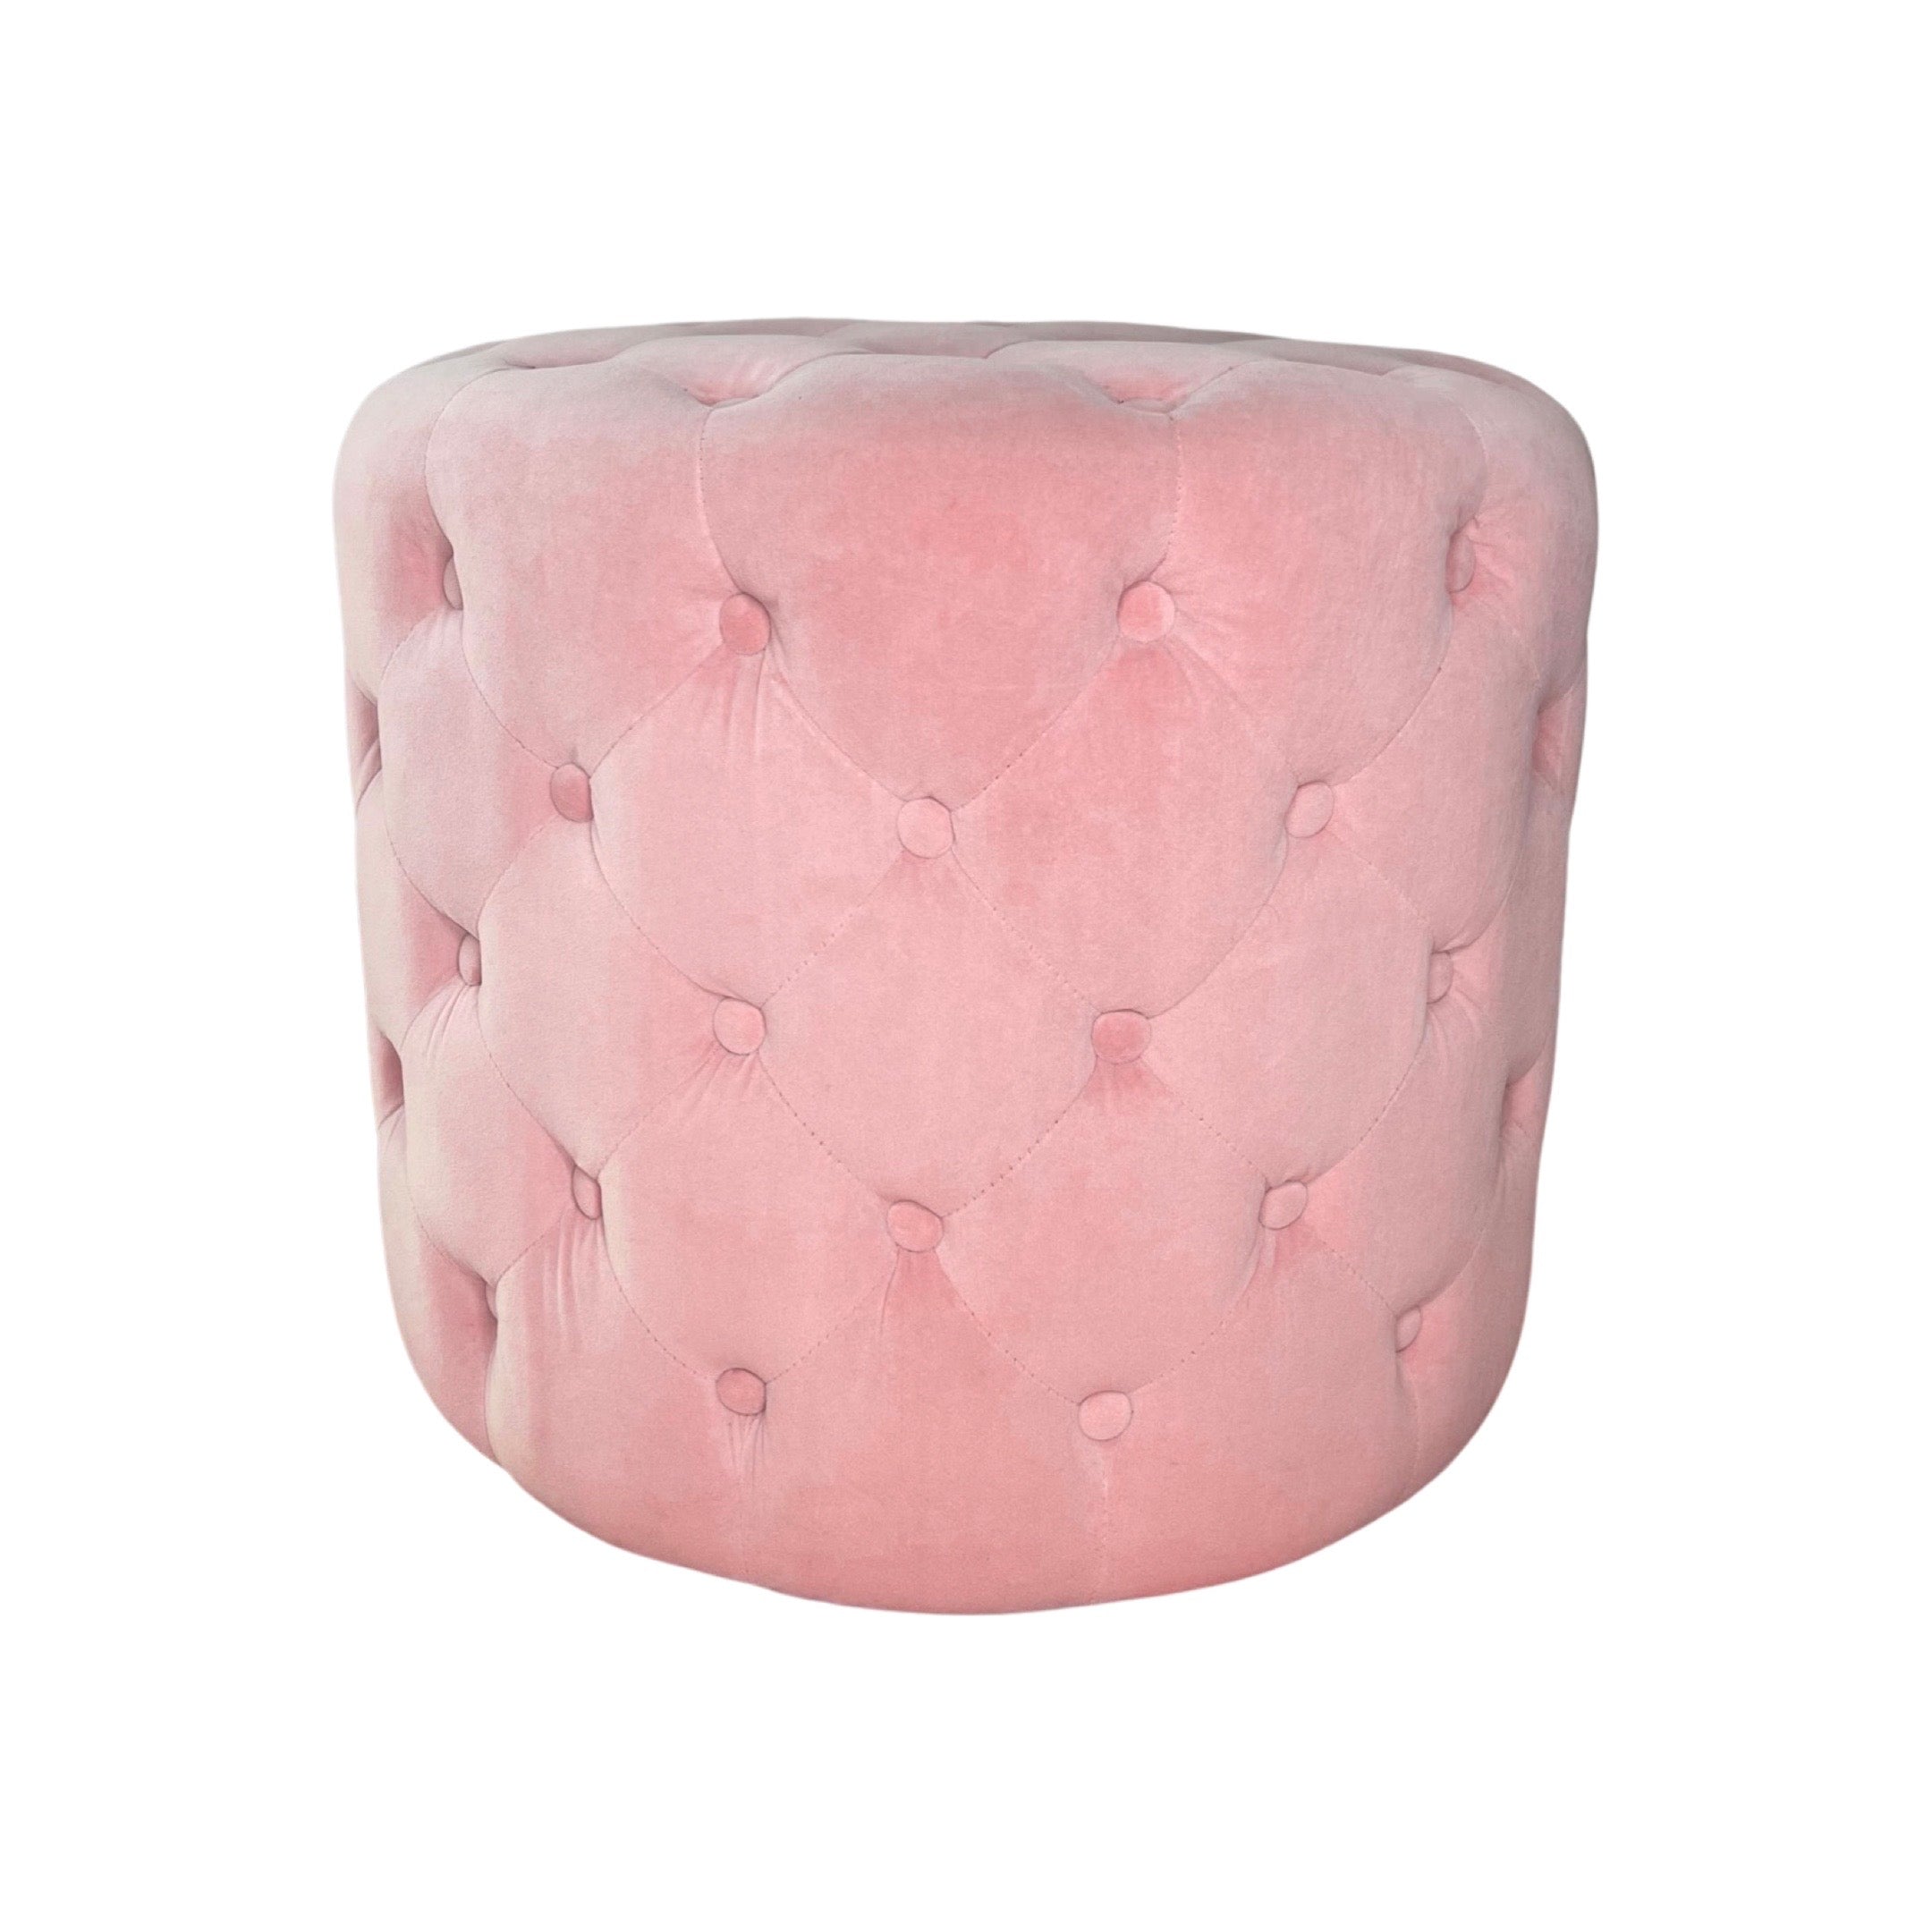 Beauty Chair Ottoman Stool Pink - LIMITED EDITION